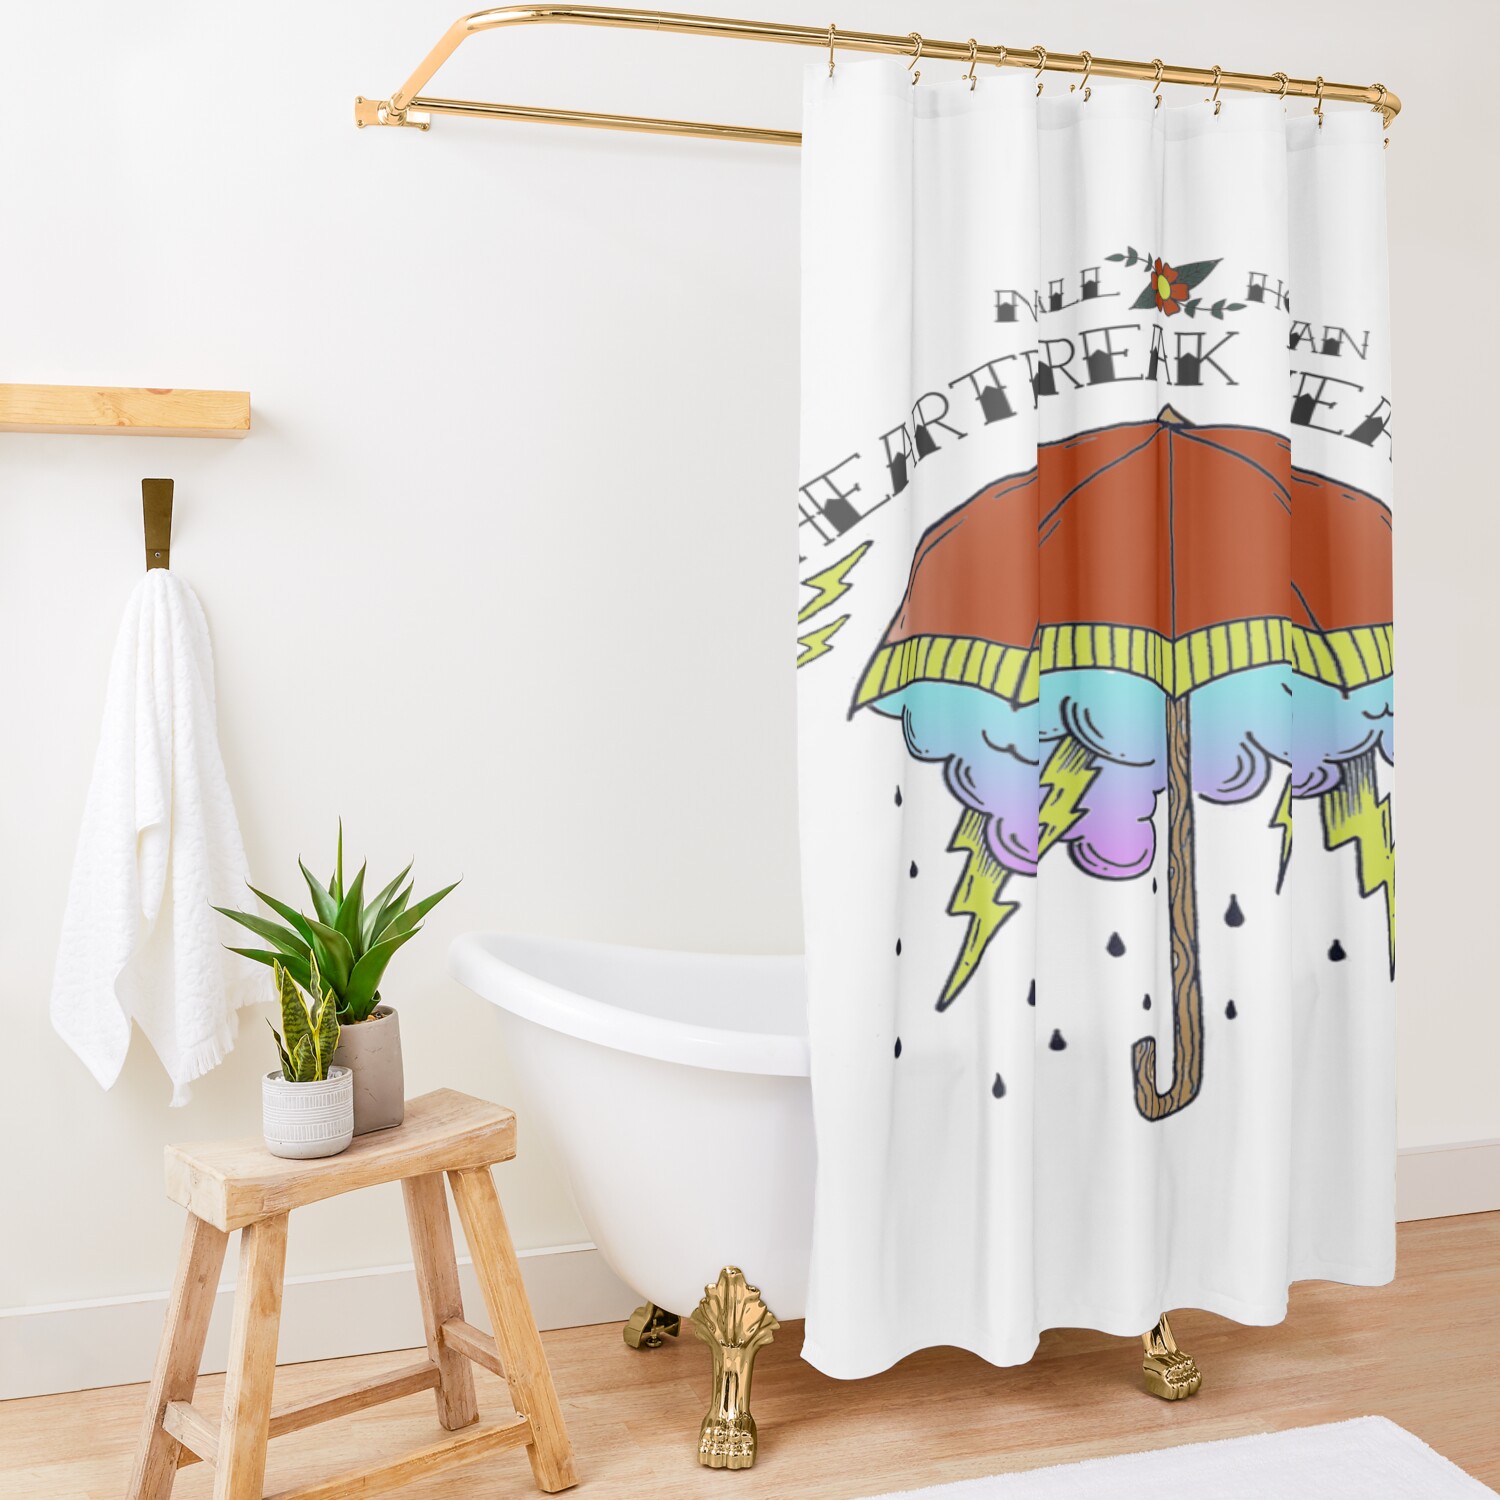 urshower curtain opensquare1500x1500 11 - Niall Horan Shop